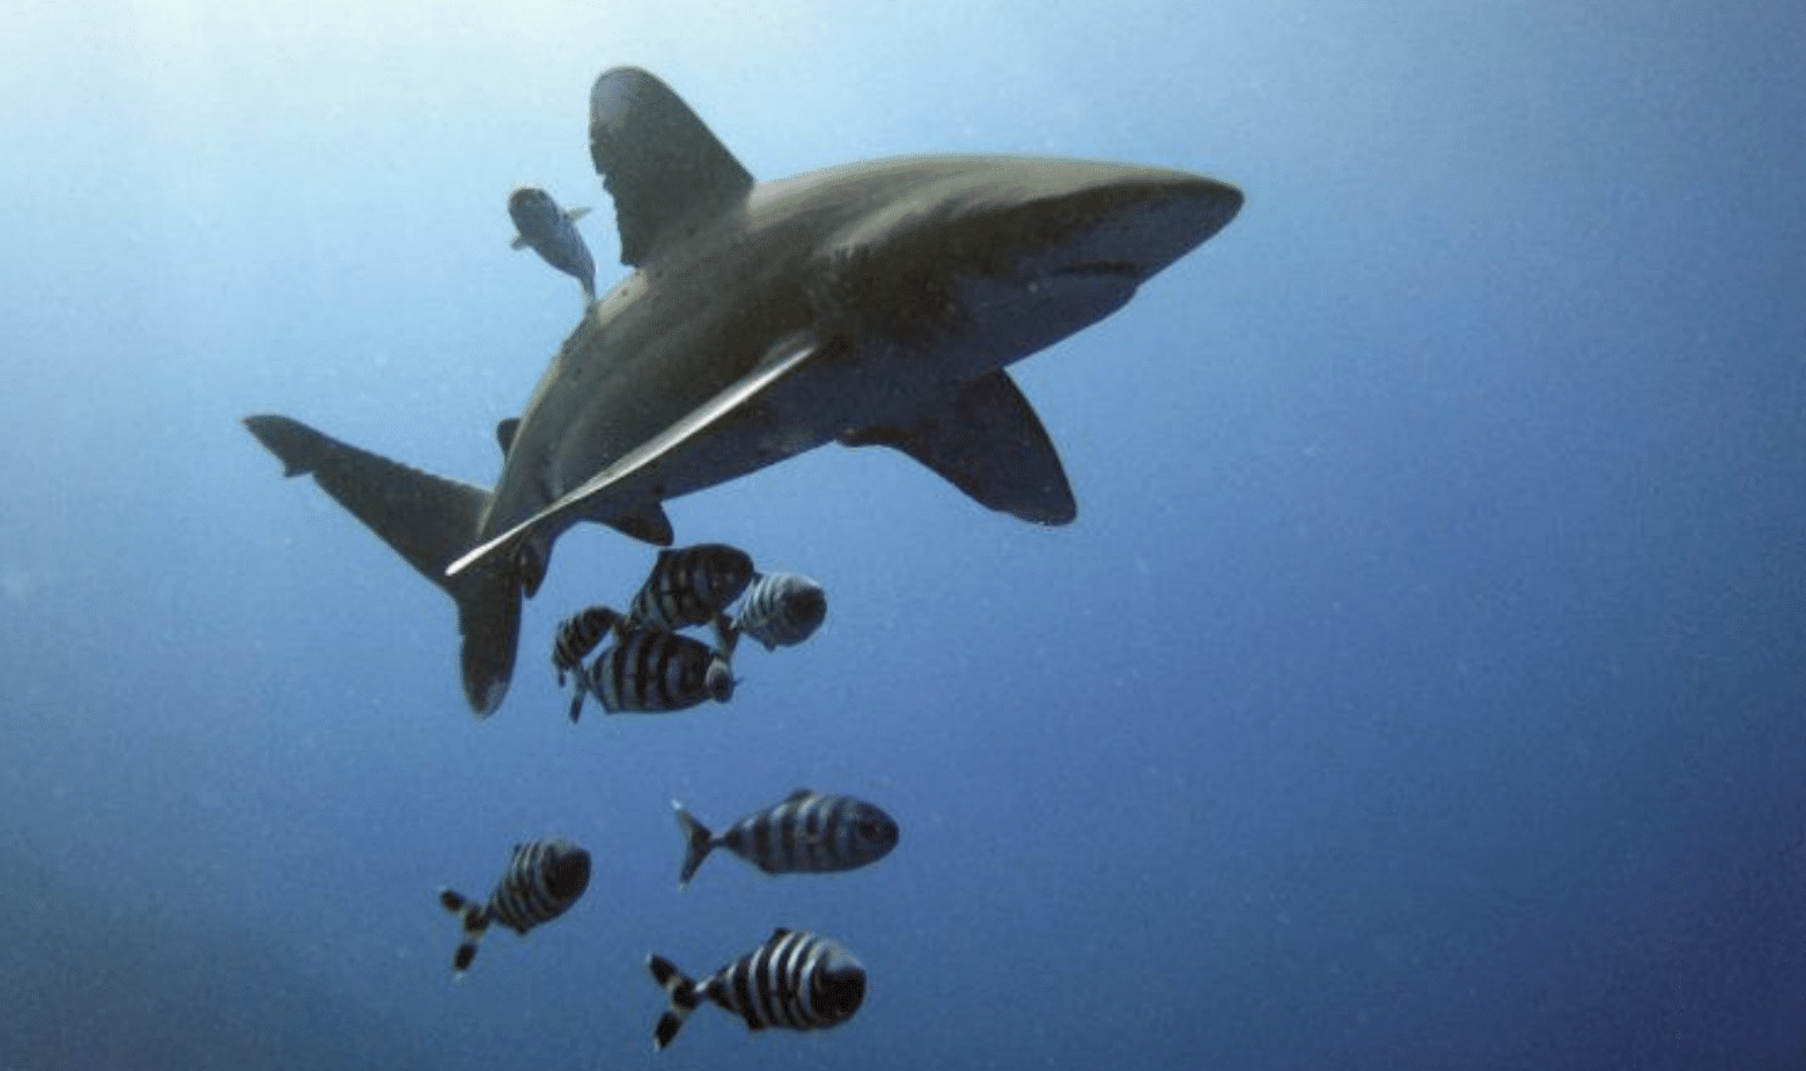 Sharks, Overfishing, Commercial Fishing, Environment, Food Chain